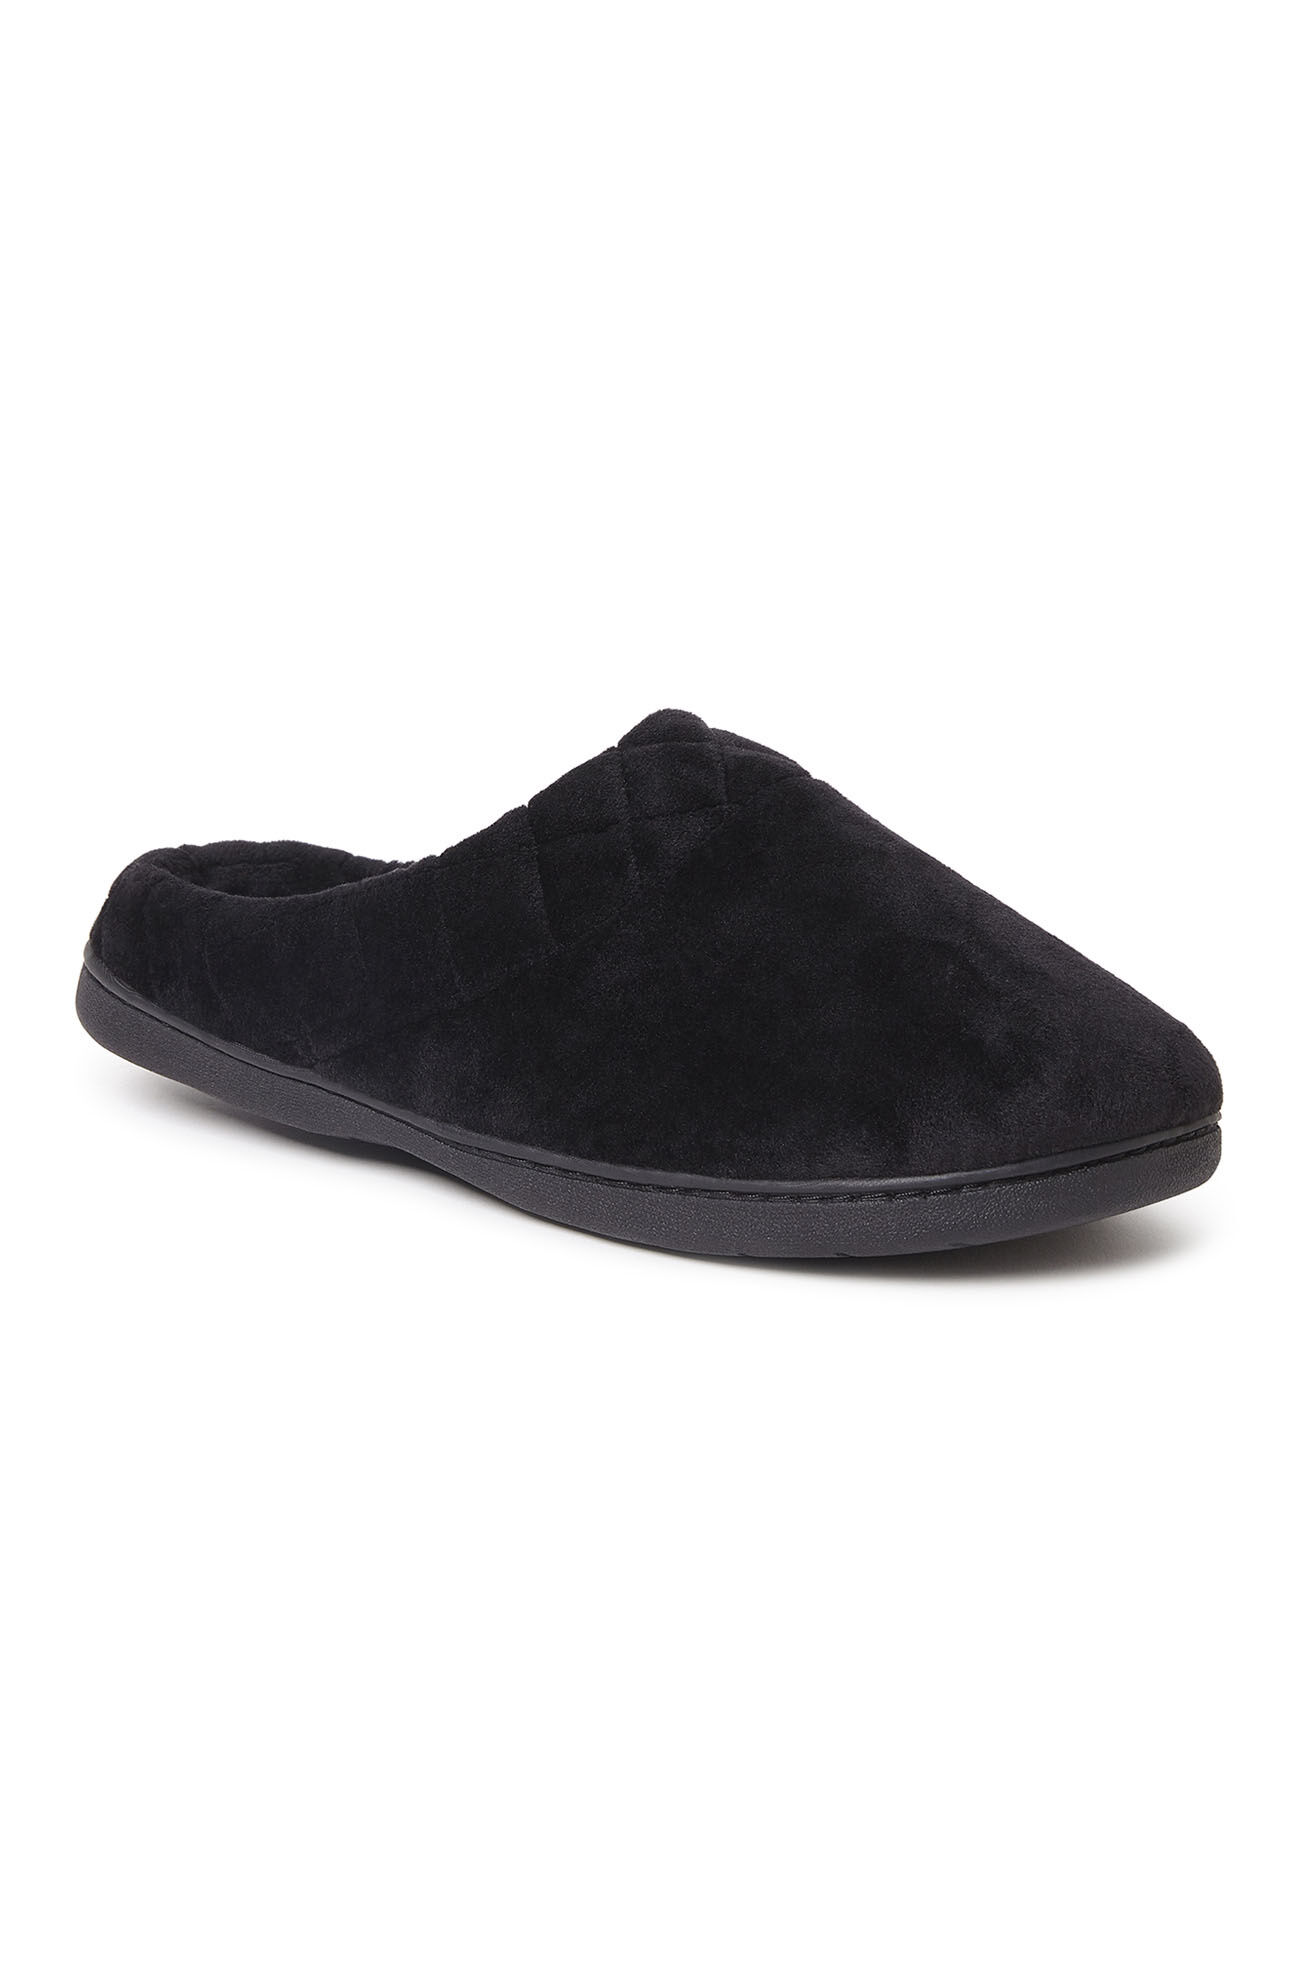 Women's Darcy Velour Clog W/Quilted Cuff Slipper by Dearfoams in Black (Size 2XLARGE)